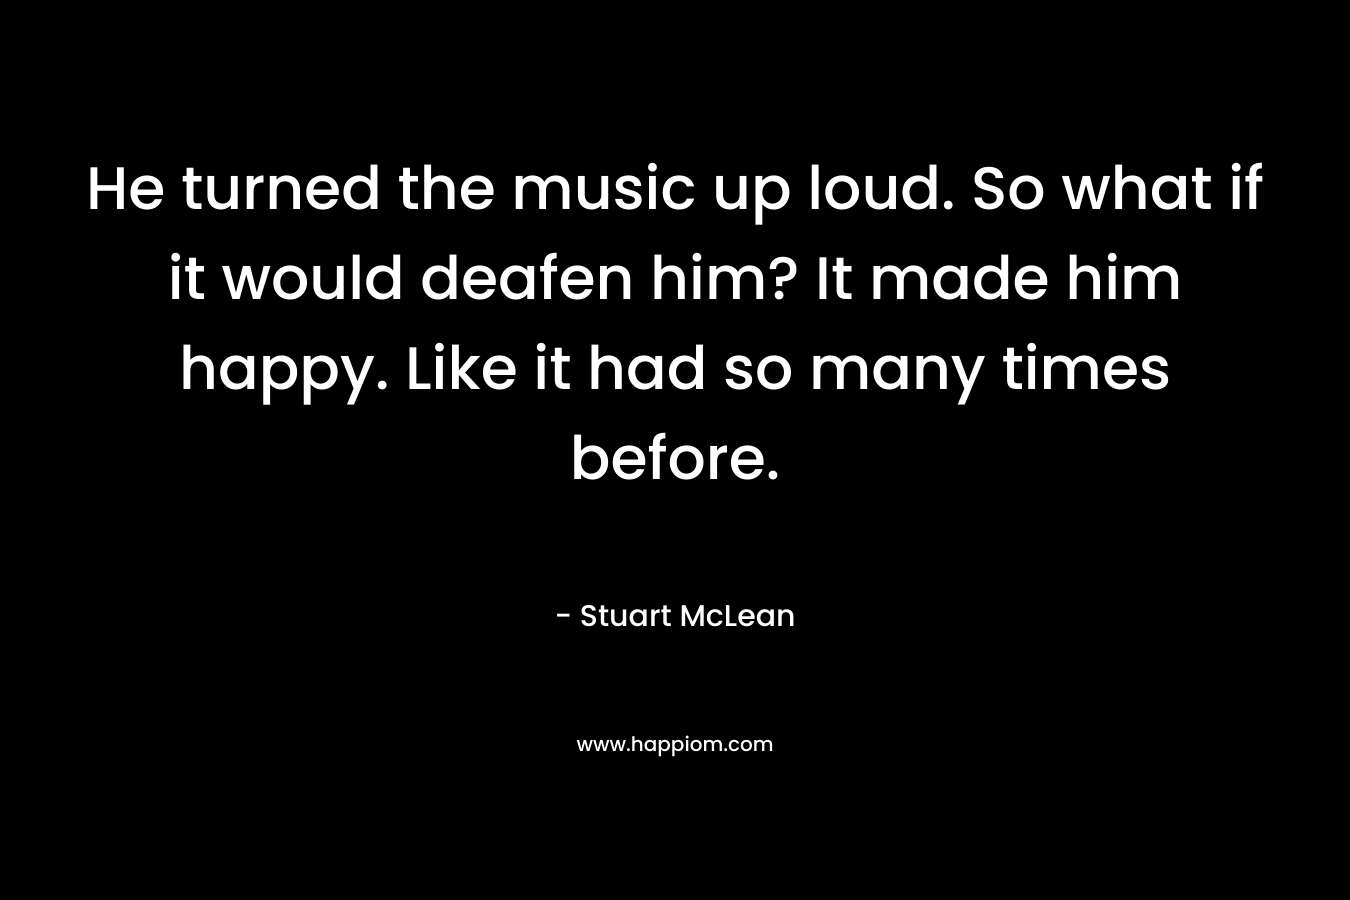 He turned the music up loud. So what if it would deafen him? It made him happy. Like it had so many times before. – Stuart McLean